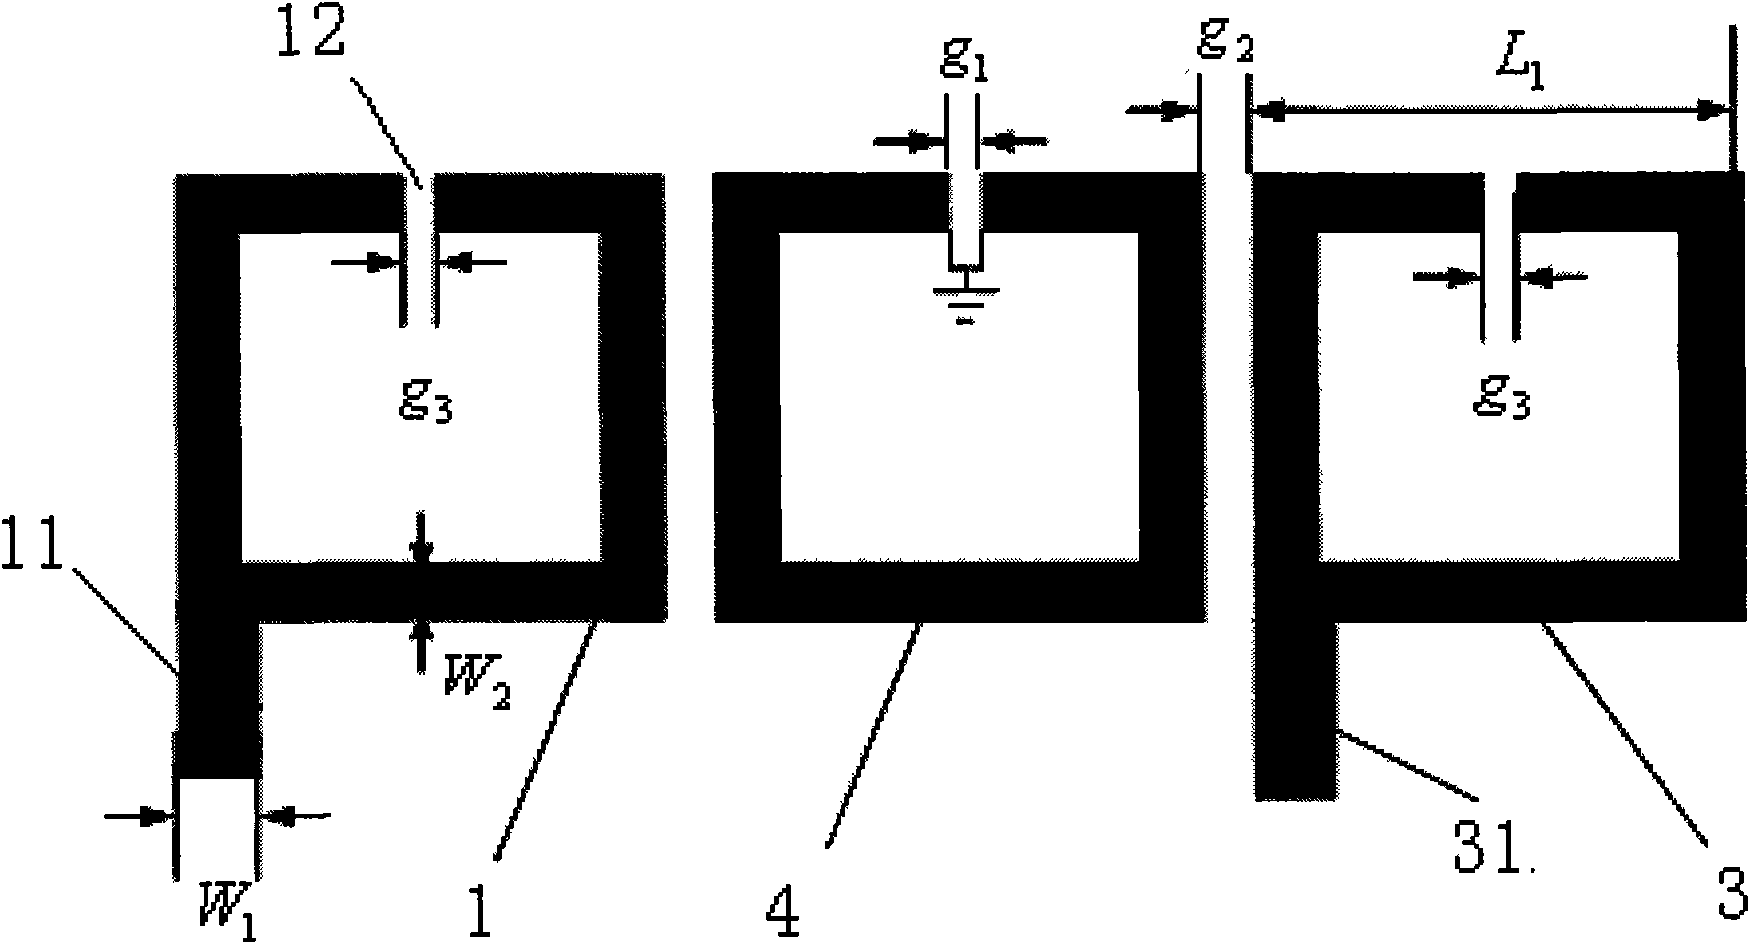 Band-pass filter capable of suppressing second harmonic